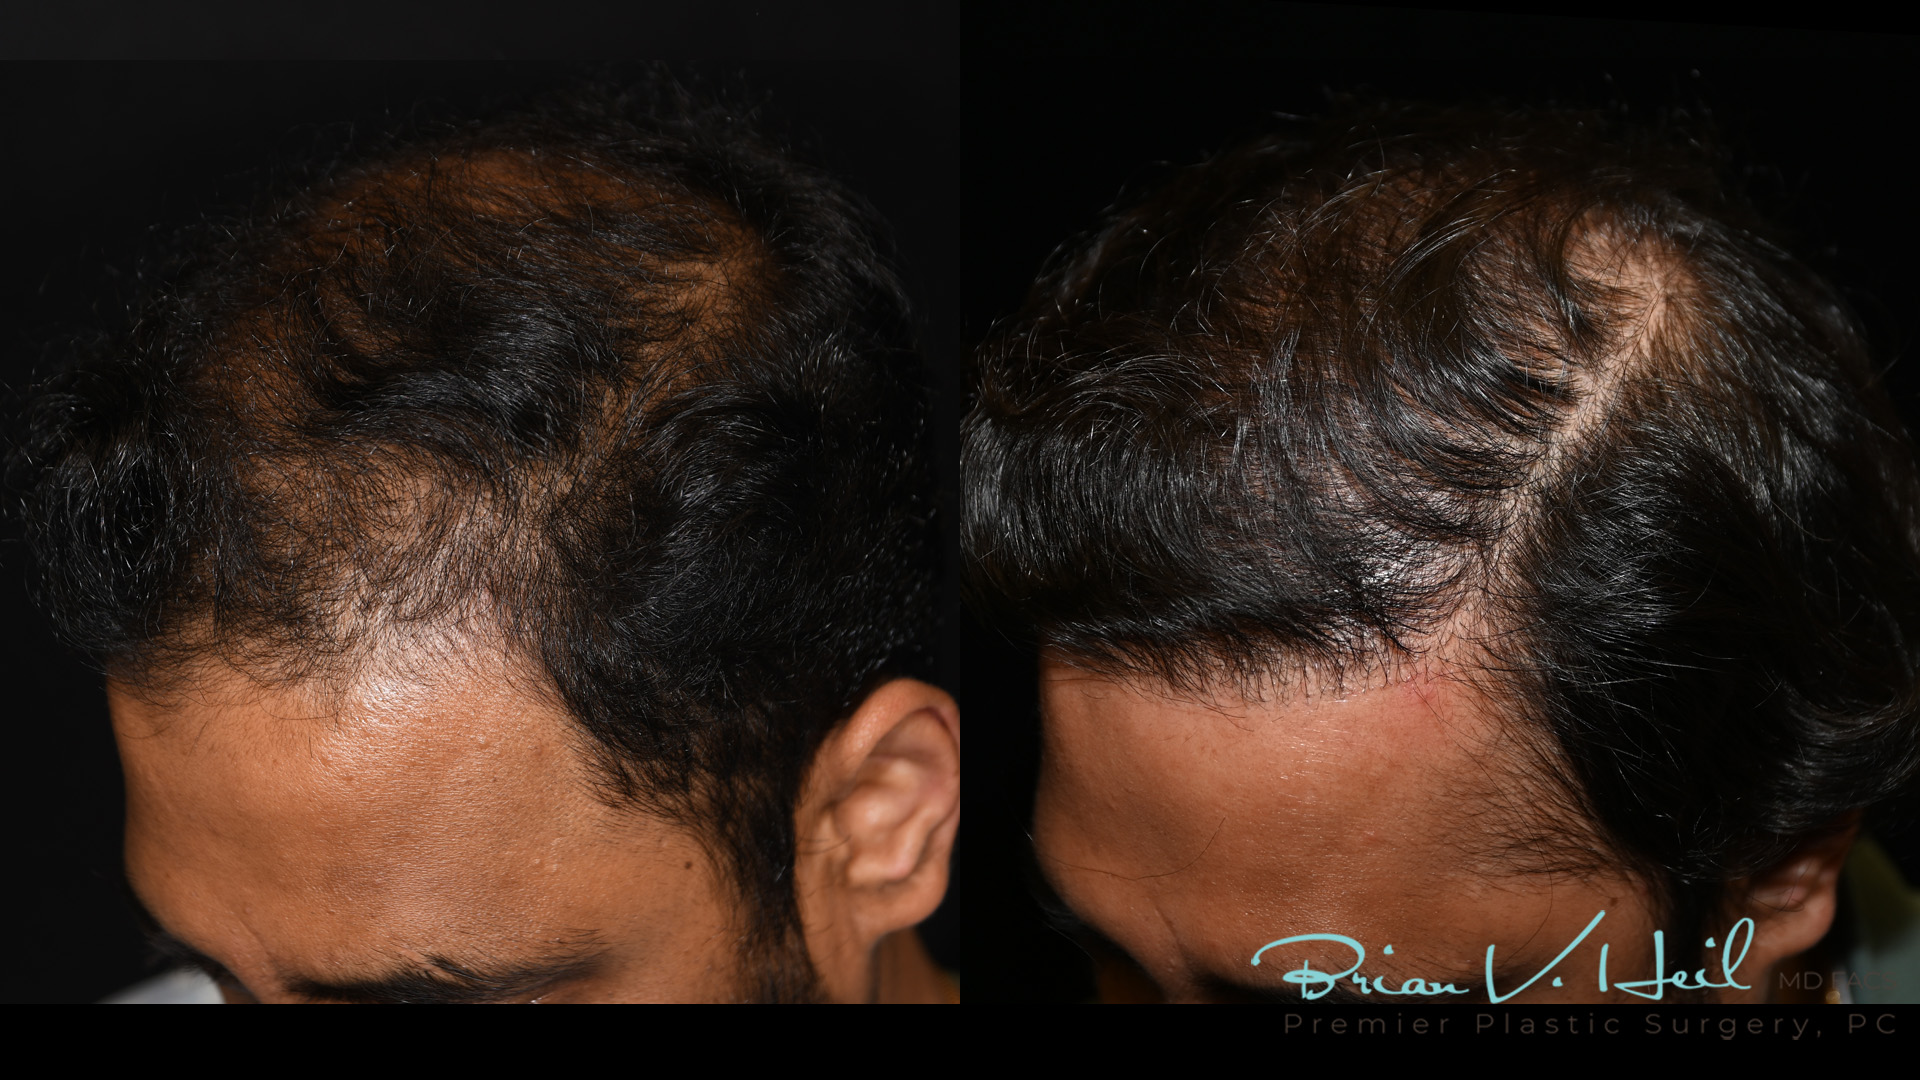 Hair Restoration Before and After | Premier Plastic Surgery